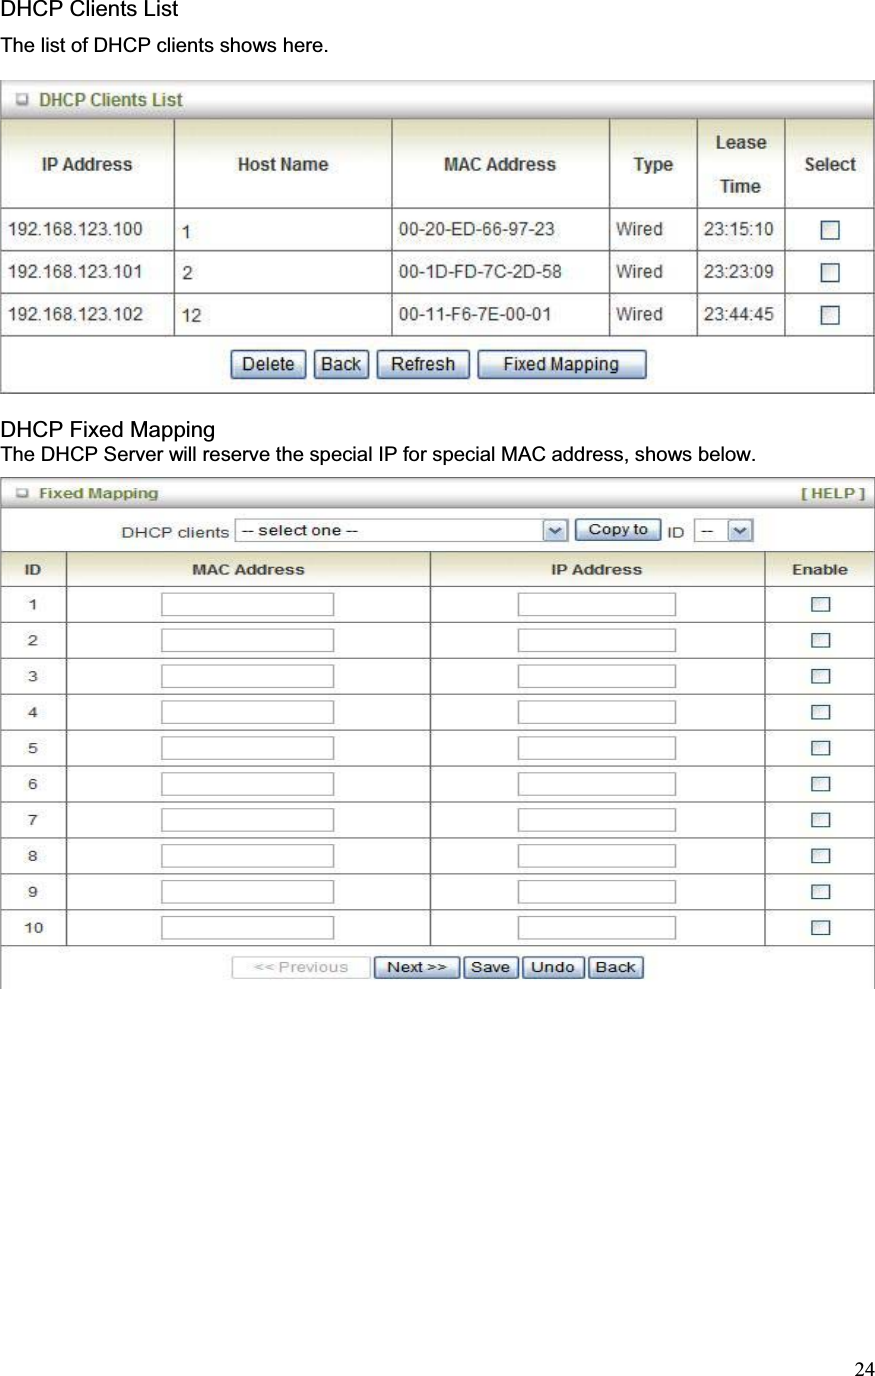 24DHCP Clients List The list of DHCP clients shows here. DHCP Fixed Mapping The DHCP Server will reserve the special IP for special MAC address, shows below. 